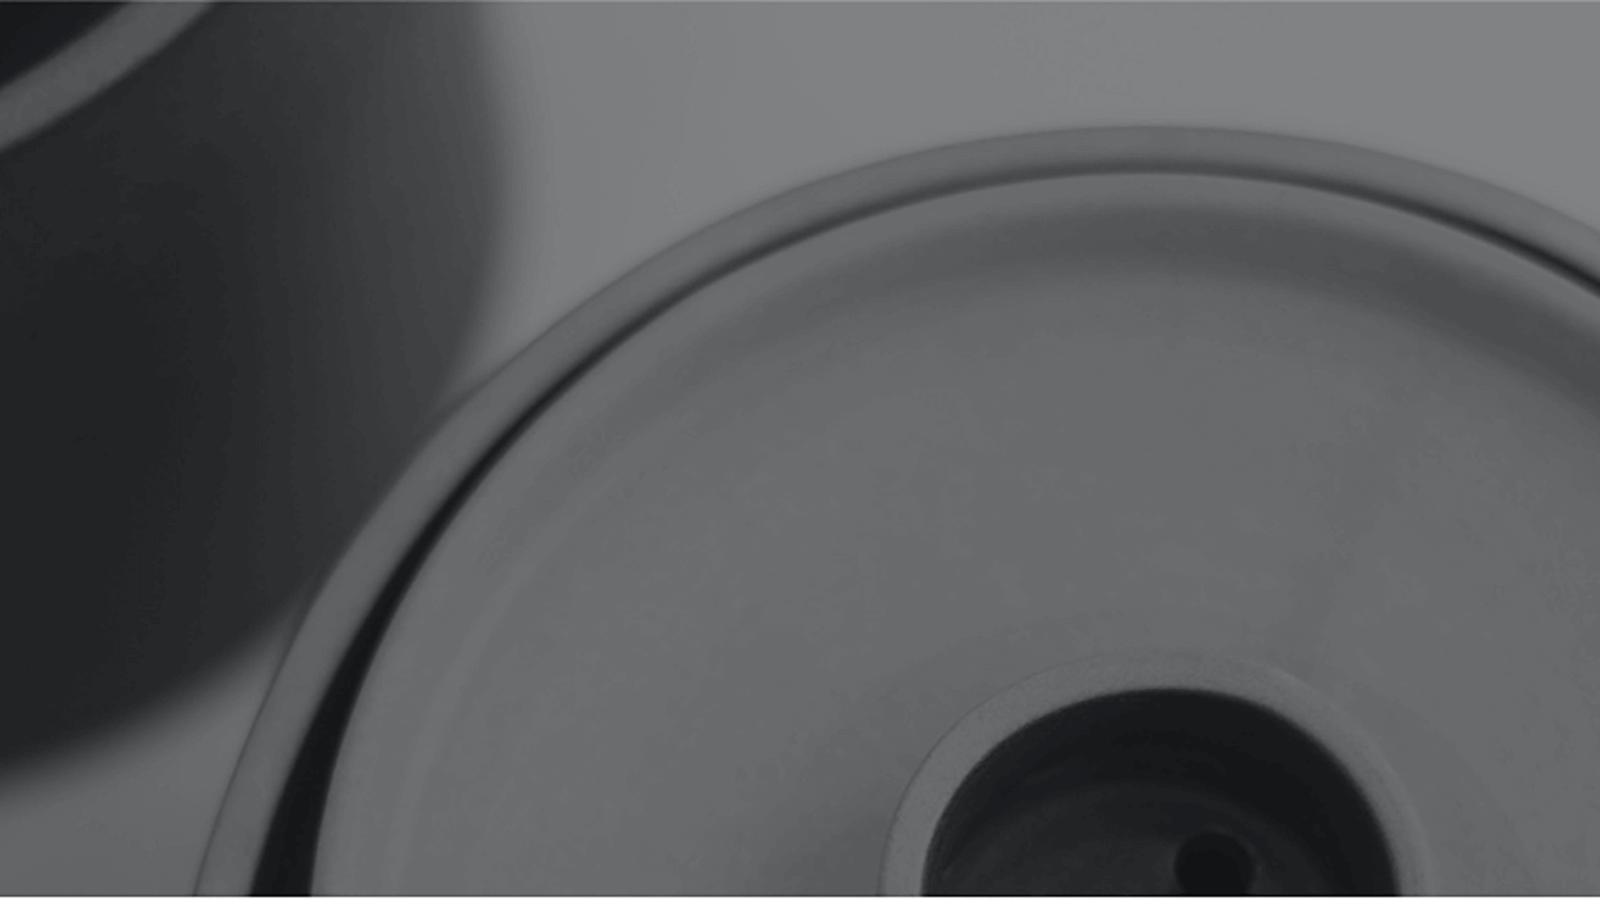 A minimal black and white detail image of the a Stäk coffee maker